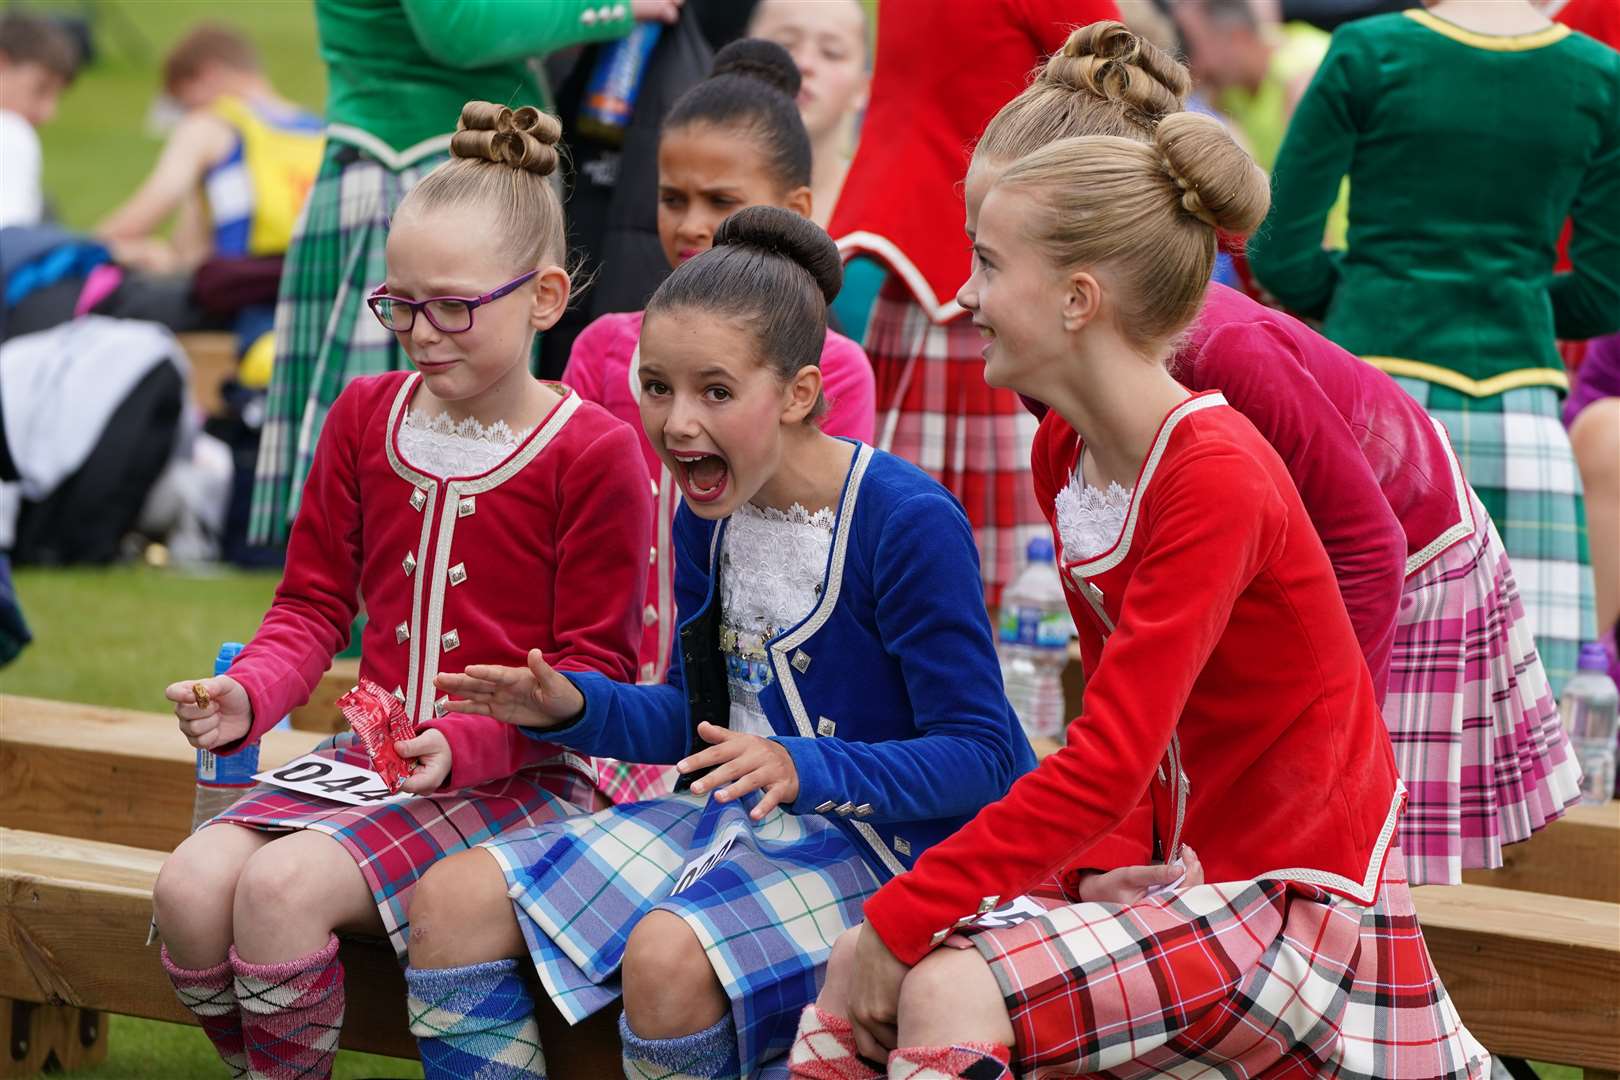 Young dancers seem delighted by the action at the Aberdeenshire sports day (Andrew Milligan/PA)